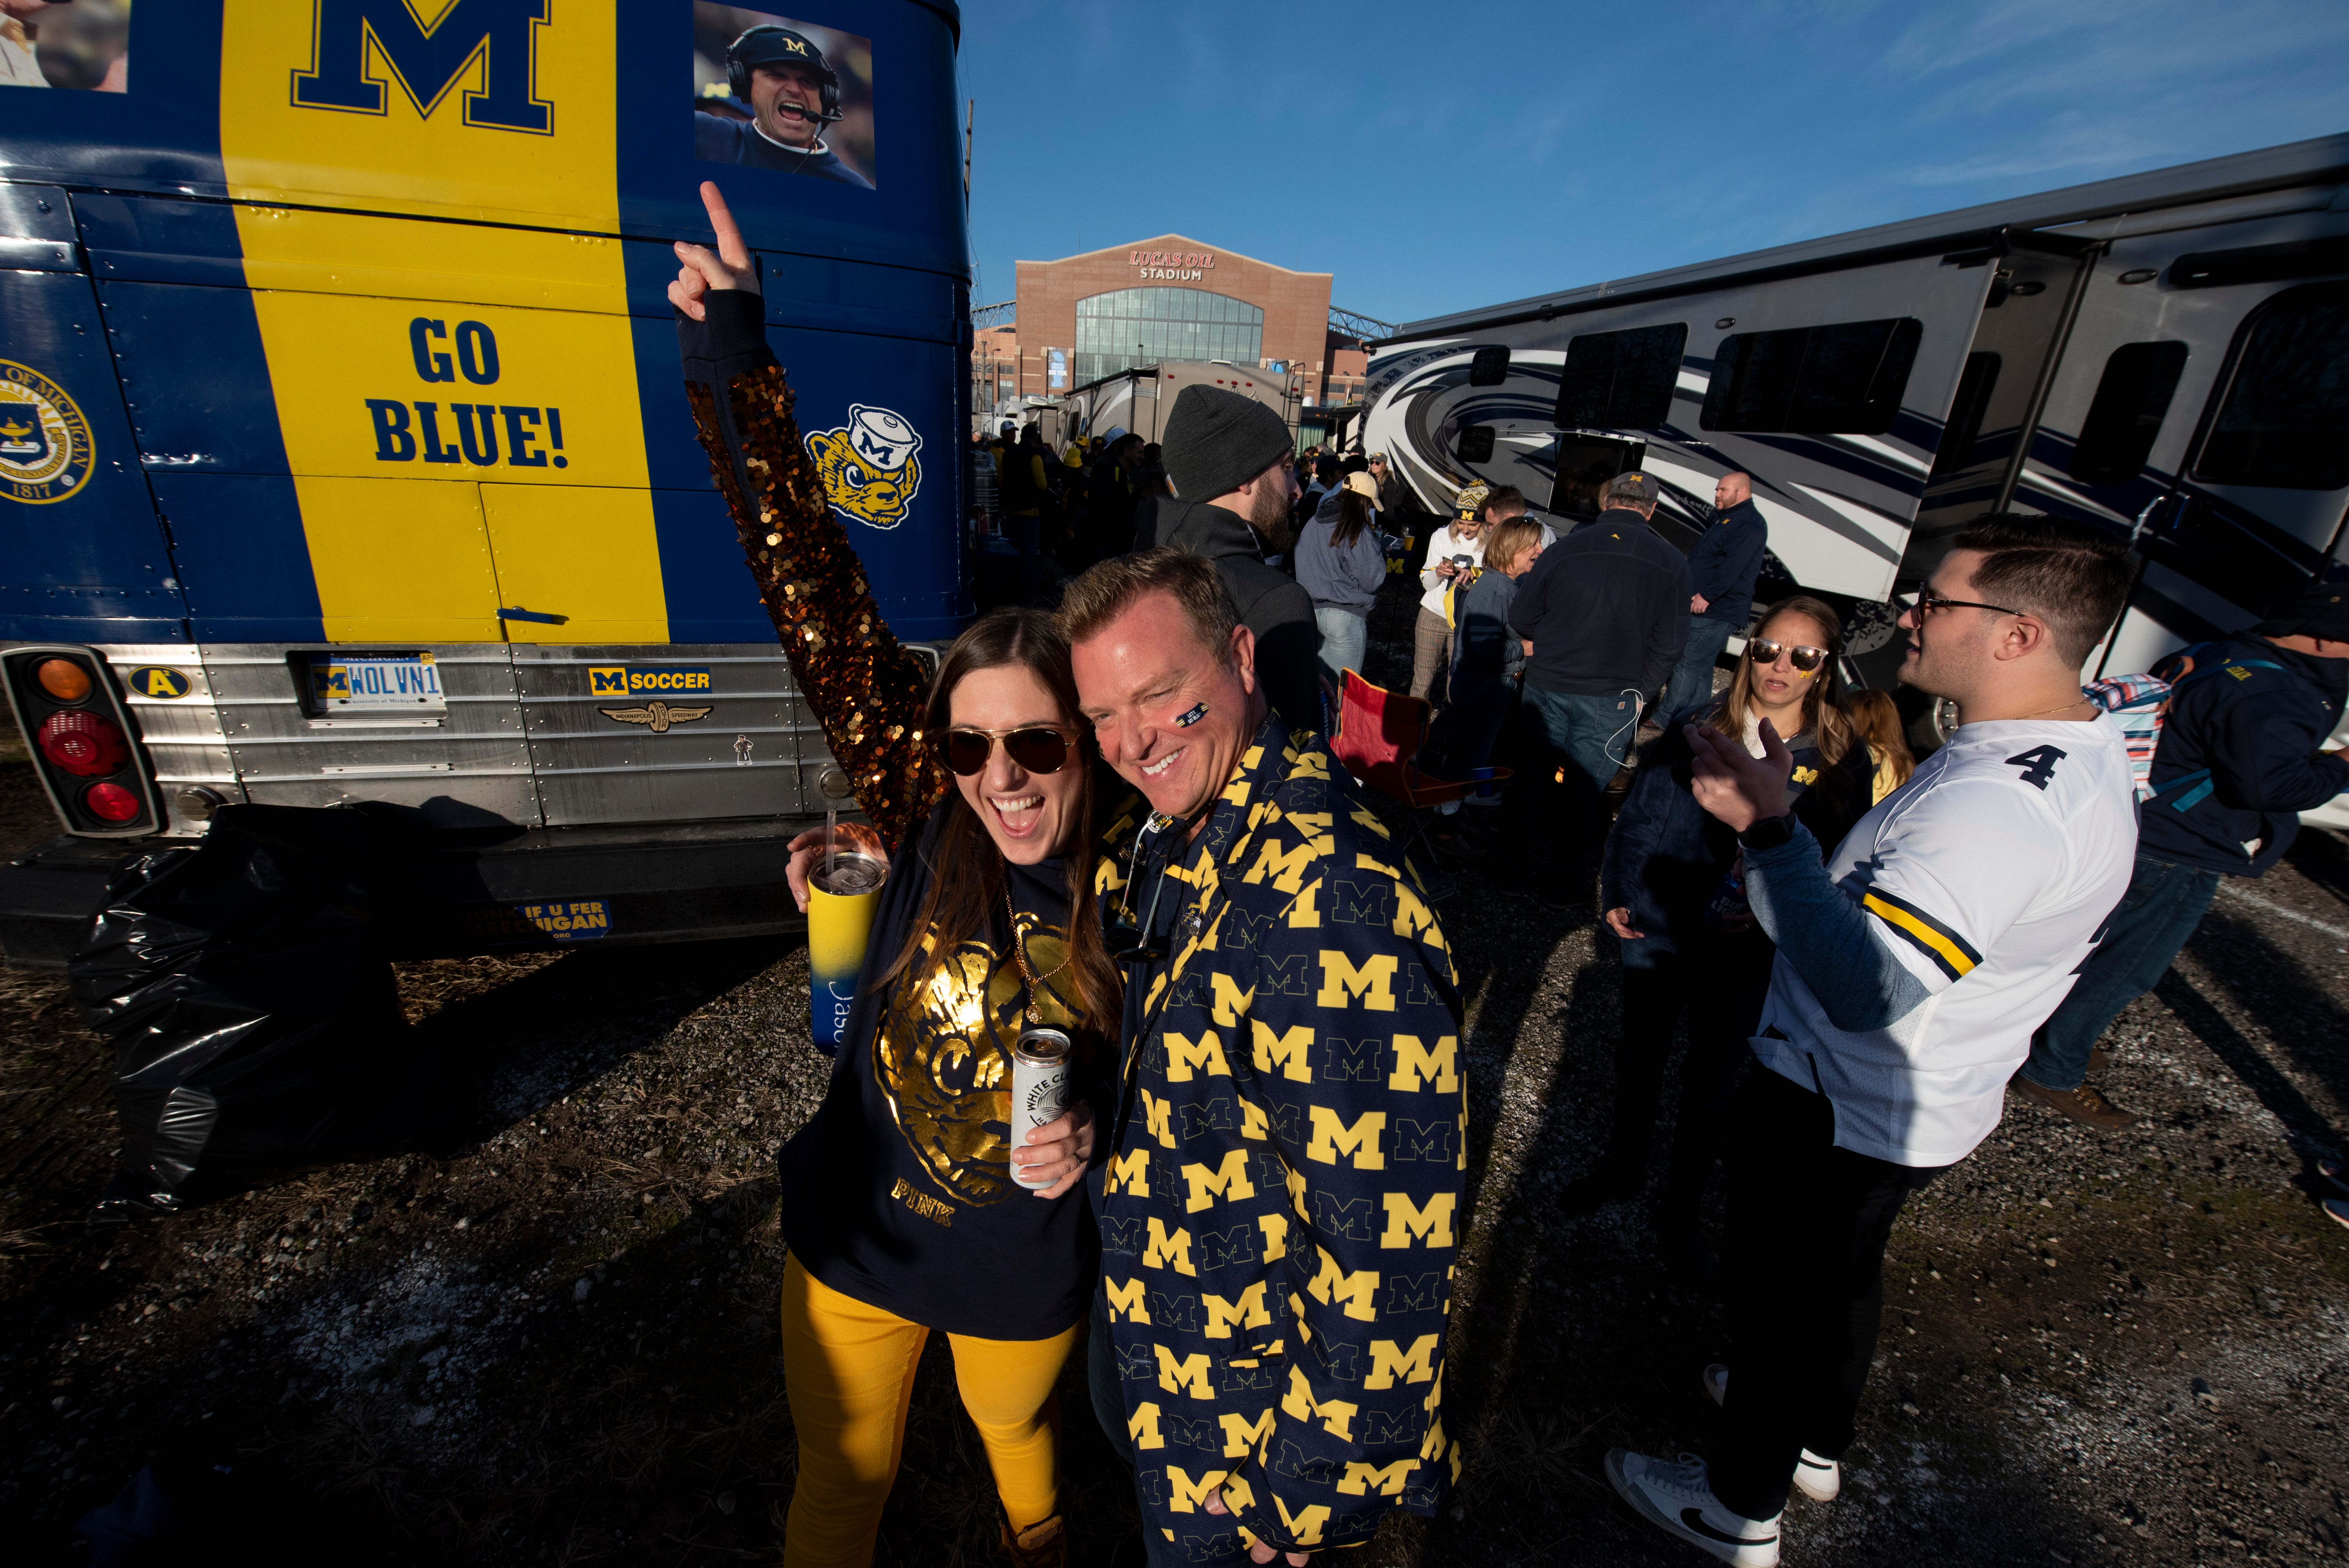 Brittany Thompson, of Wixom, left, and Jason Huntoon, of Novi, tailgate together outside of Lucas Oil Stadium before the start of the Big Ten championship game in Indianapolis, December 4, 2021.